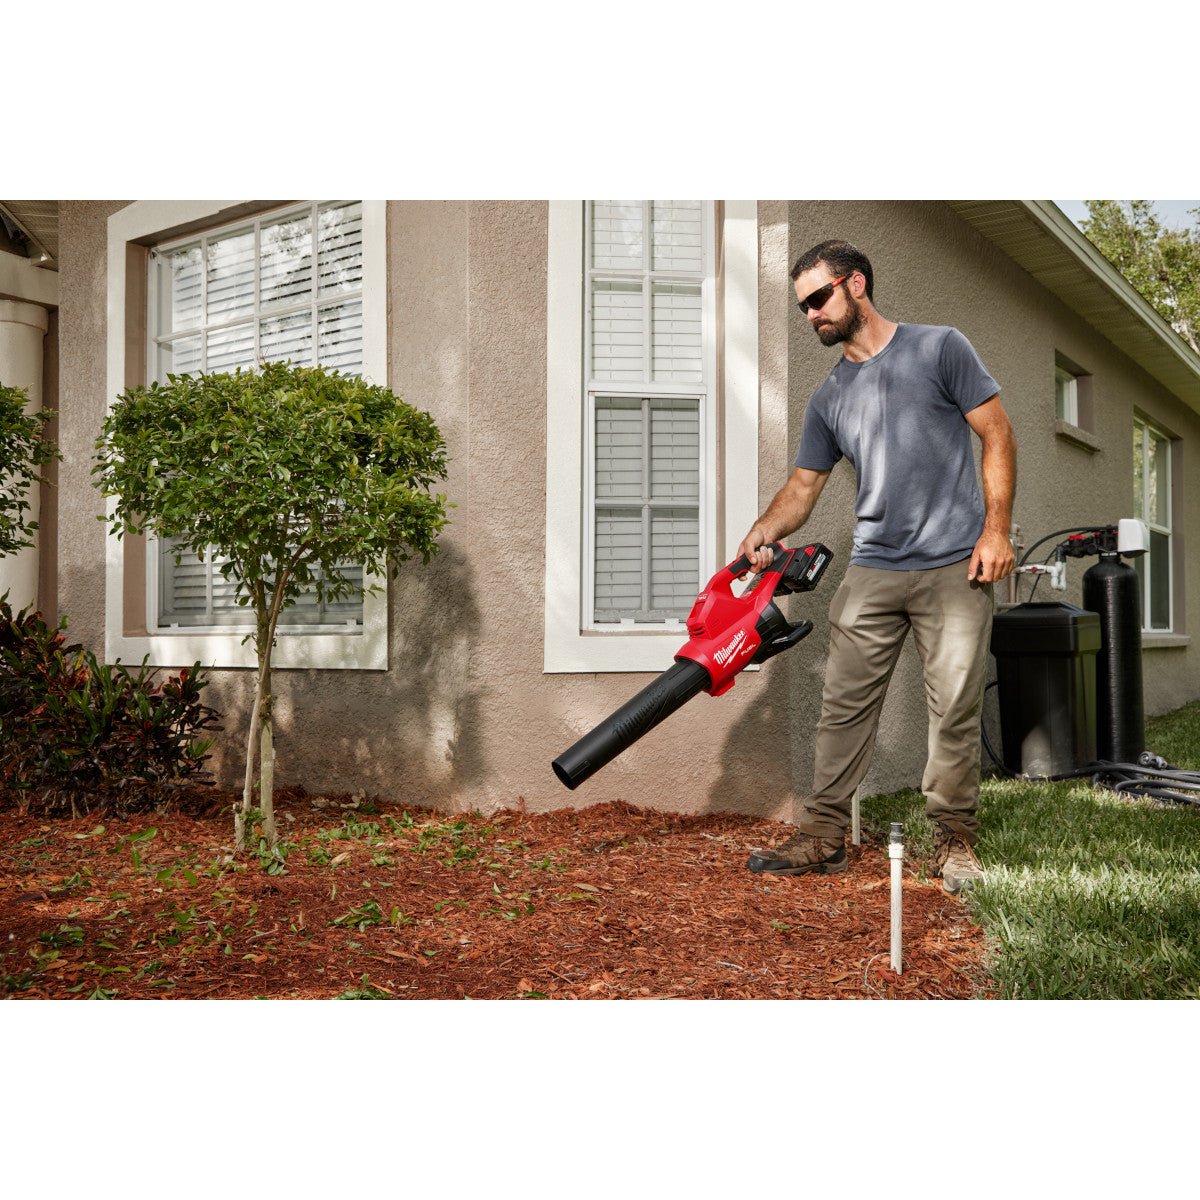 MILWAUKEE  2824-20  M18 FUEL™ Dual Battery Blower - Tool Only